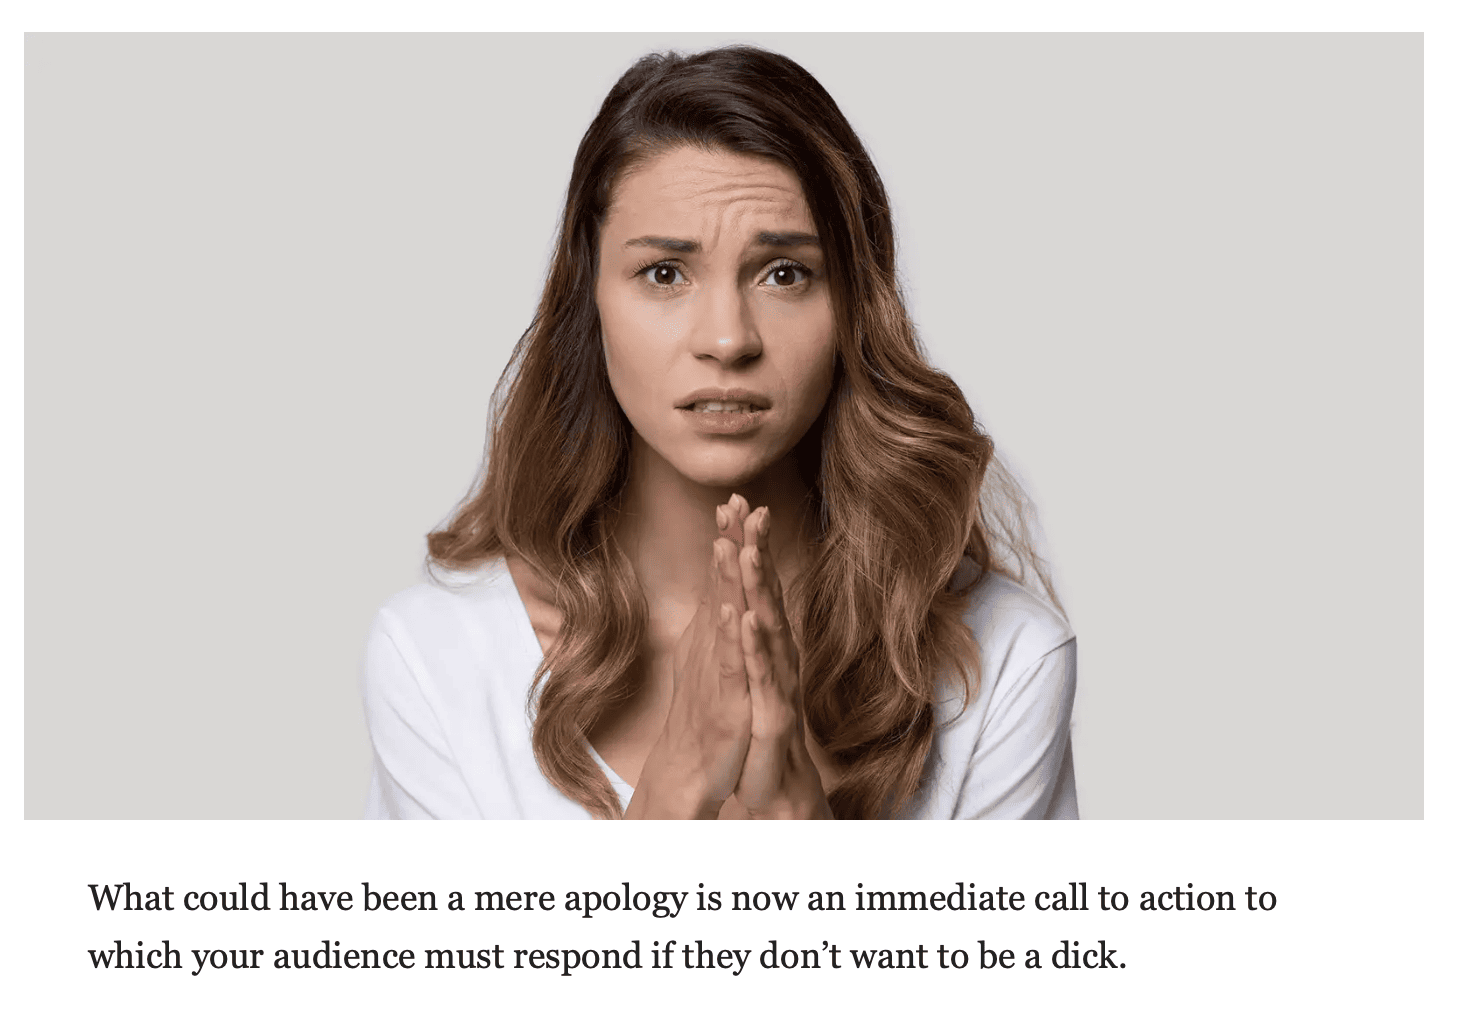 image from Onion article featuring a photo of a young woman making a beseeching face, her palms pressed together in supplication, with the text, 